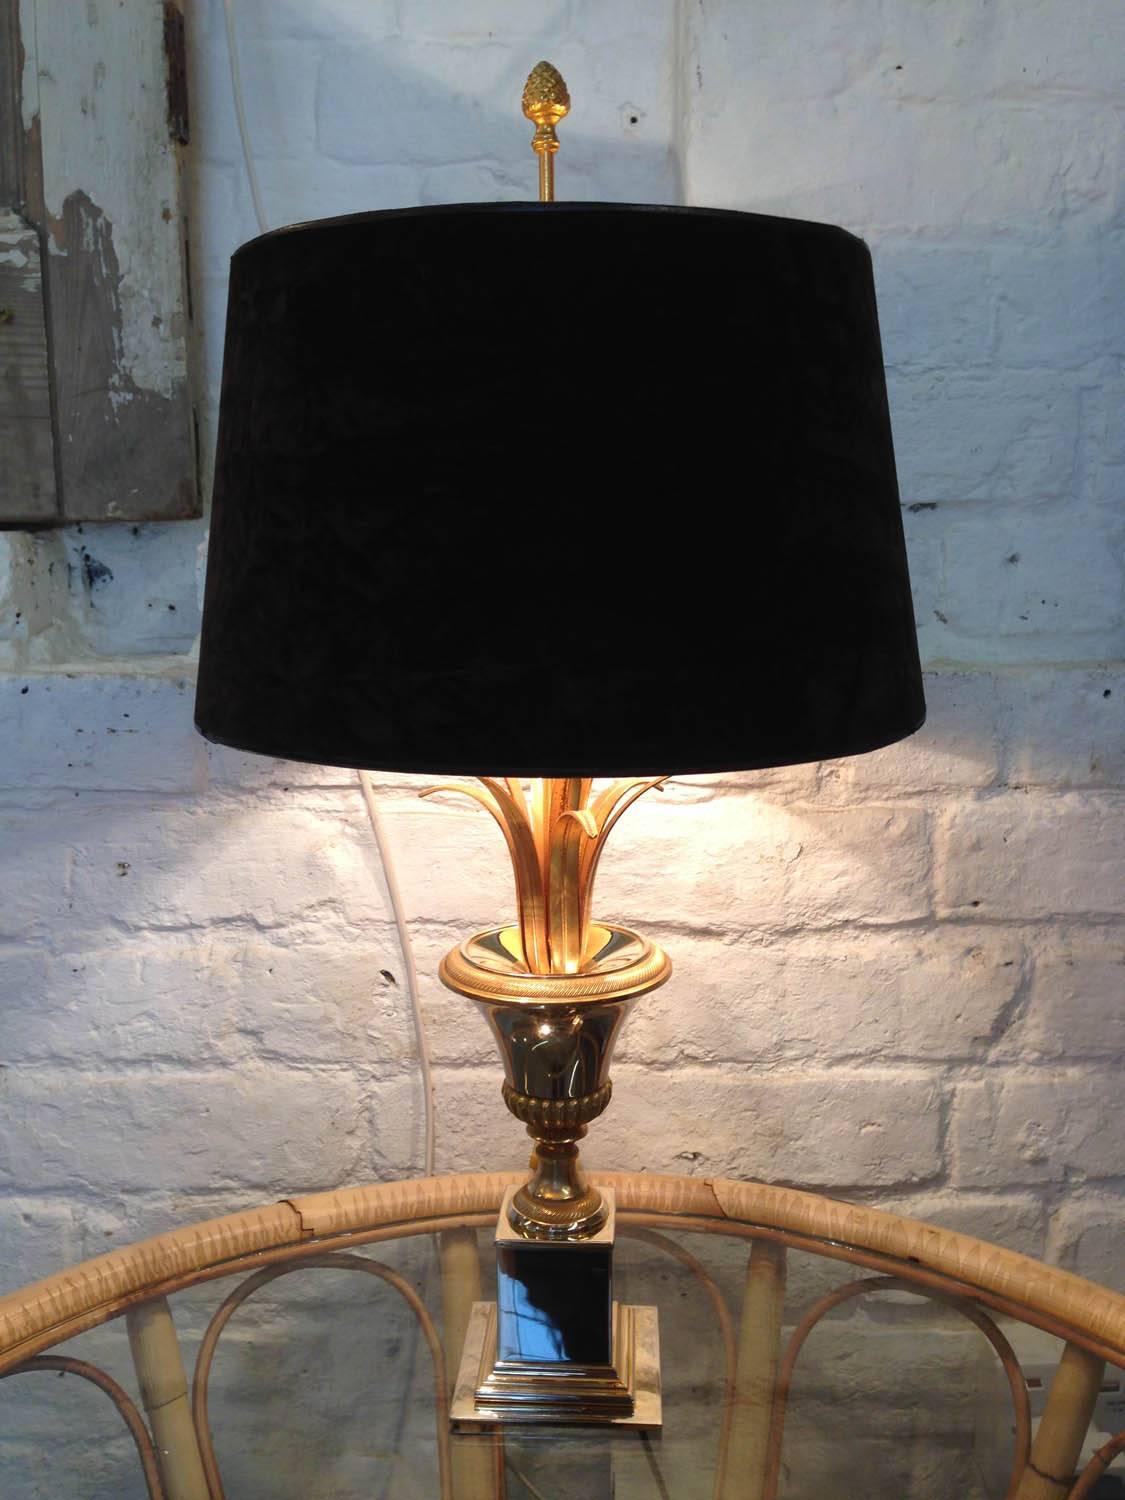 Eye-catching Hollywood Regency-style palm table lamp from Belgium, probably by Boulanger.
 
Gold and silver effect base, with its original brown crushed velvety shade.

Only minor wear as per age, the lamp has been PAT tested for domestic